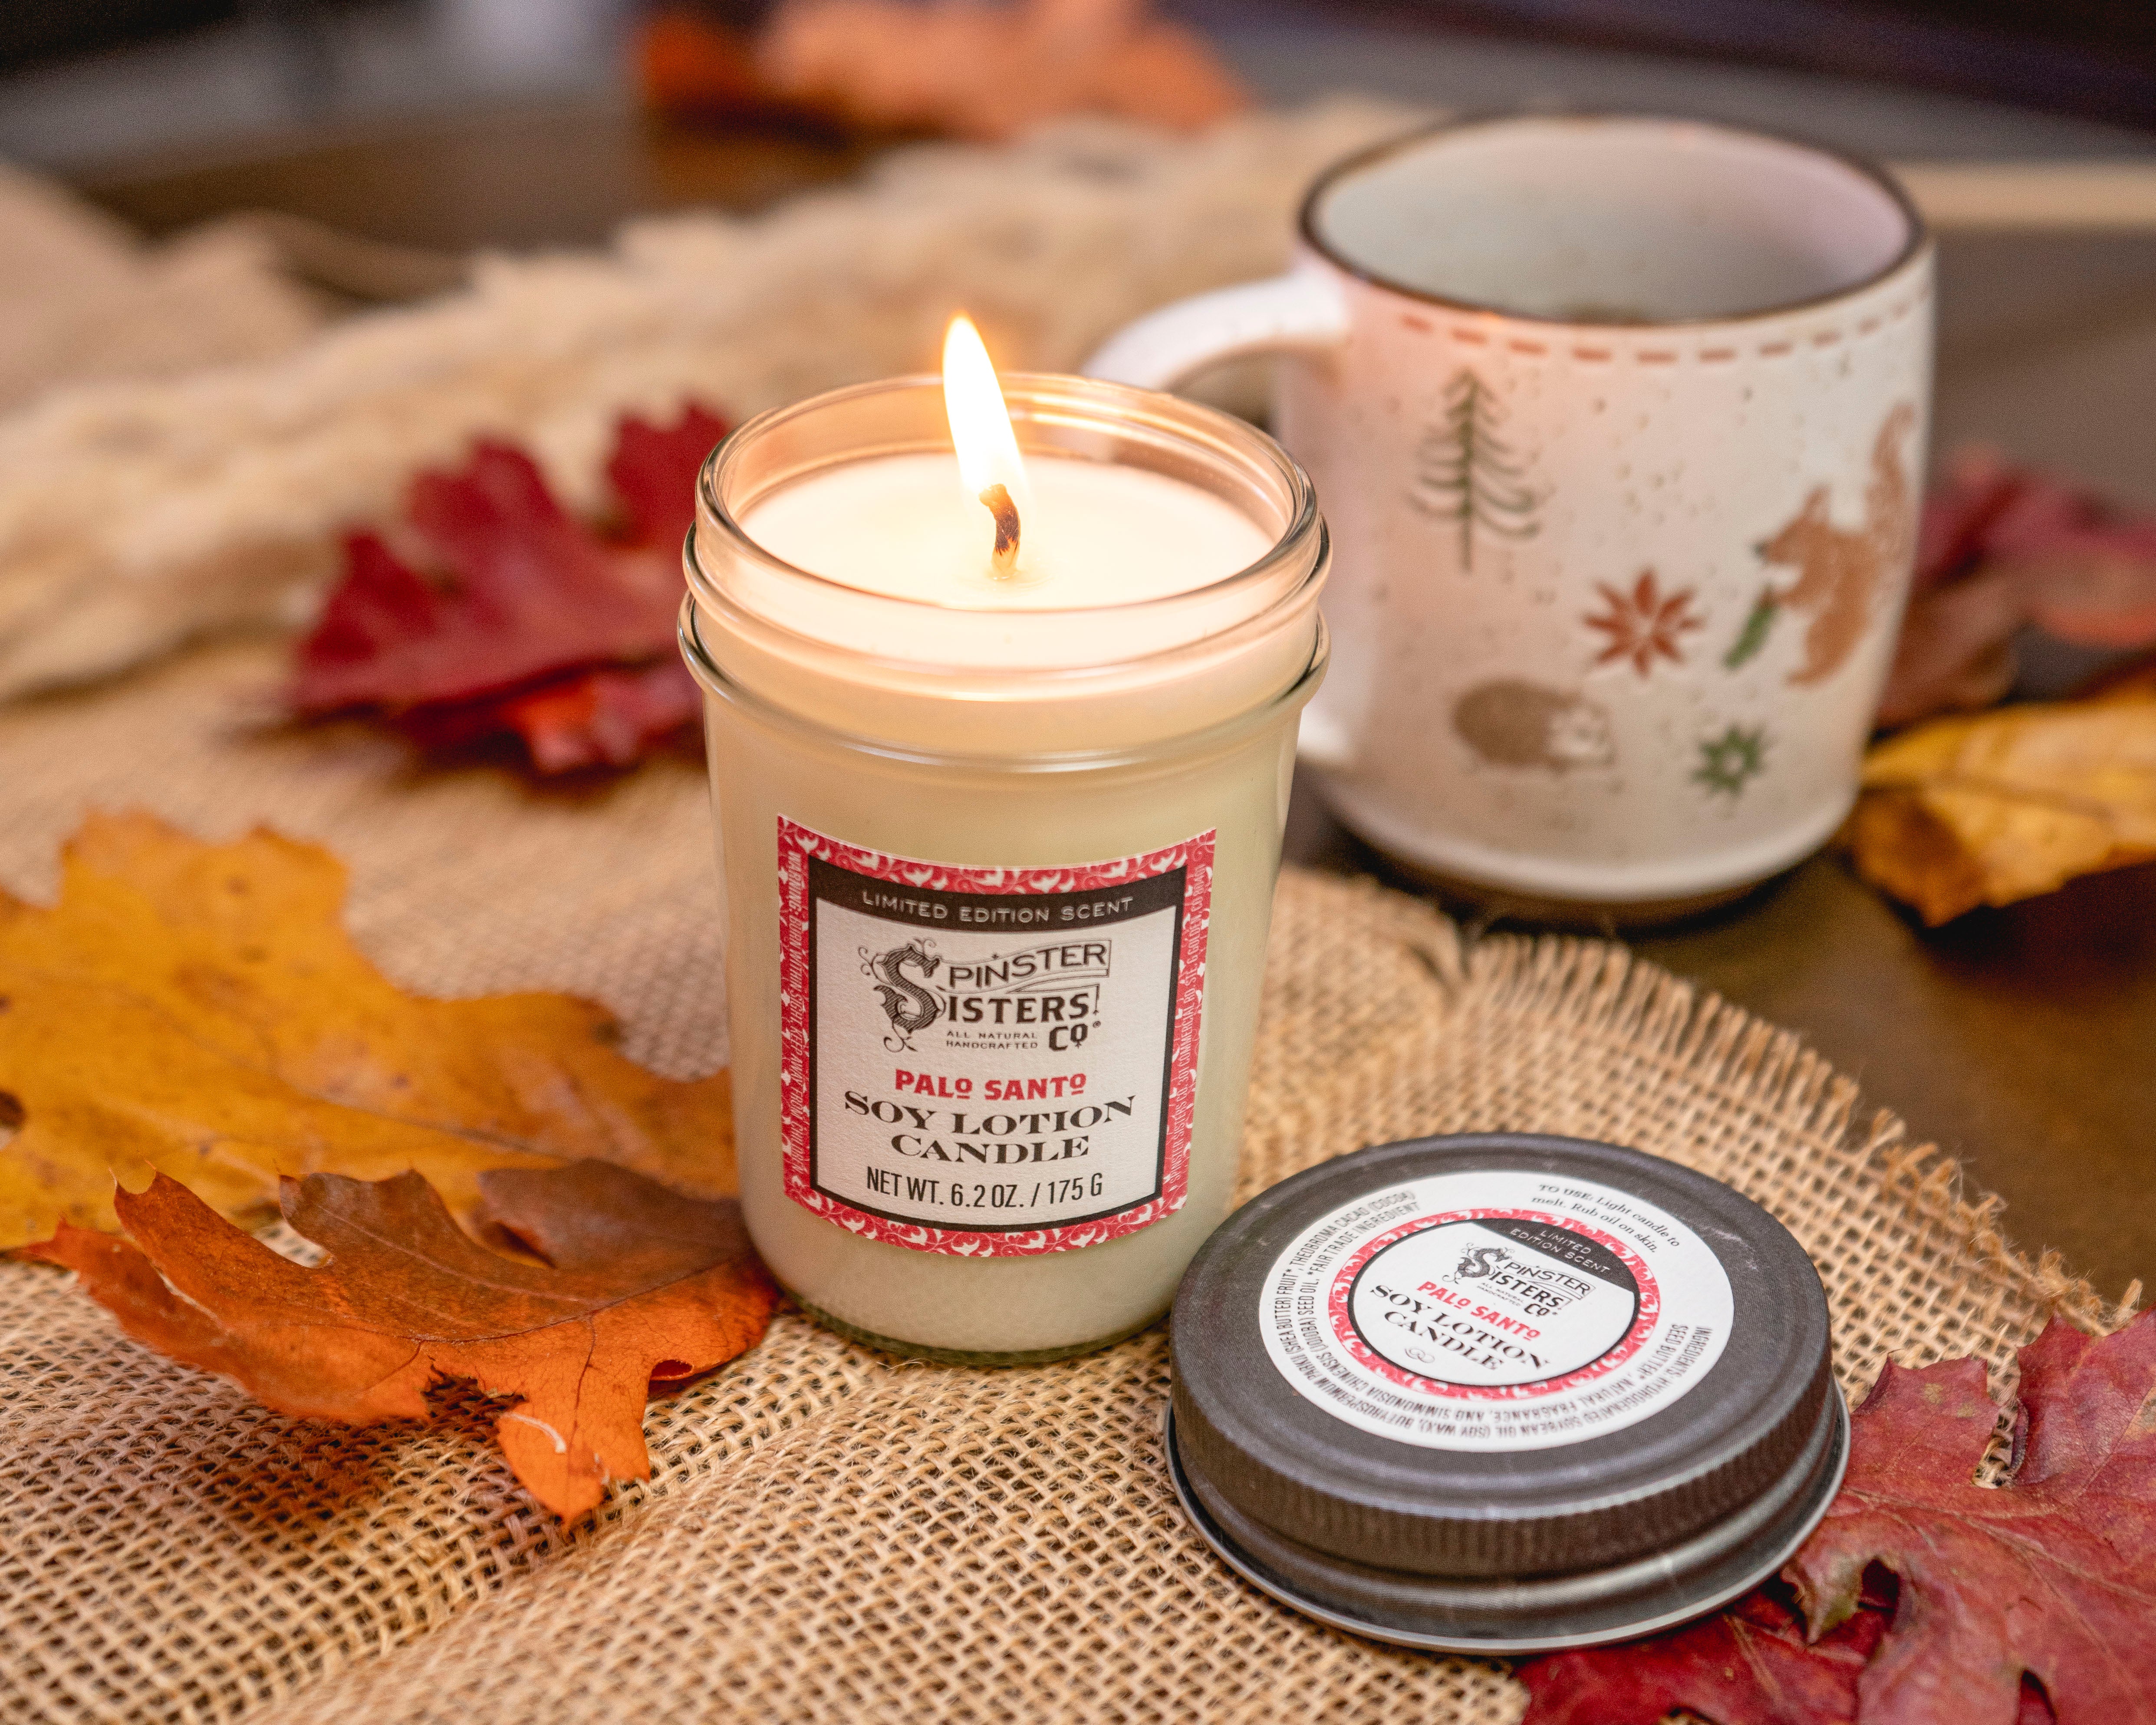 A Palo Santo scented Soy Lotion Candle burns in its jar next to its lid, a coffee mug and among scattered autumn leaves